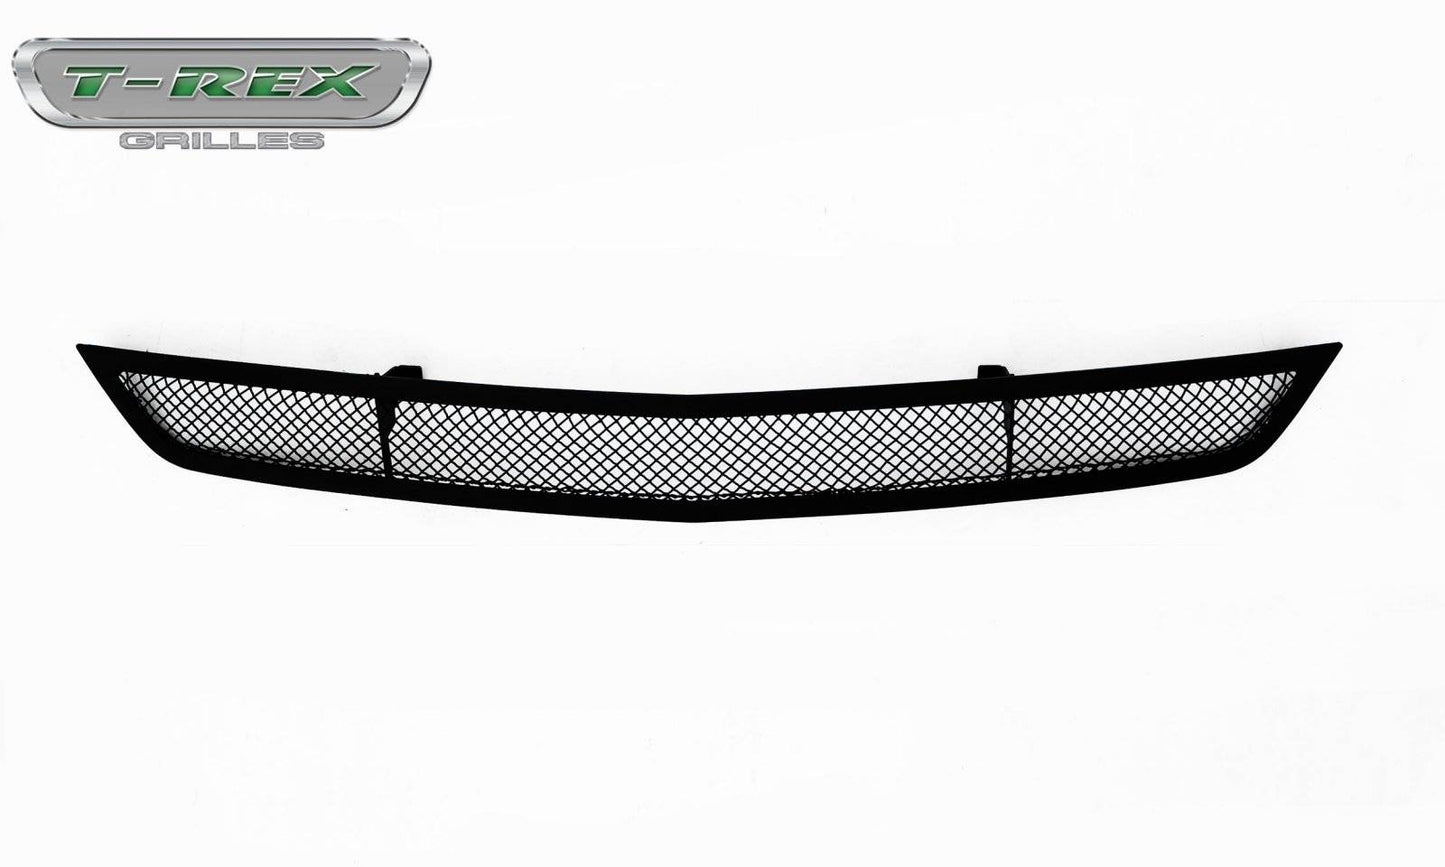 T-REX Grilles 52530 Black Mild Steel Small Mesh Bumper Grille Fits 2015-2017 Ford Mustang GT